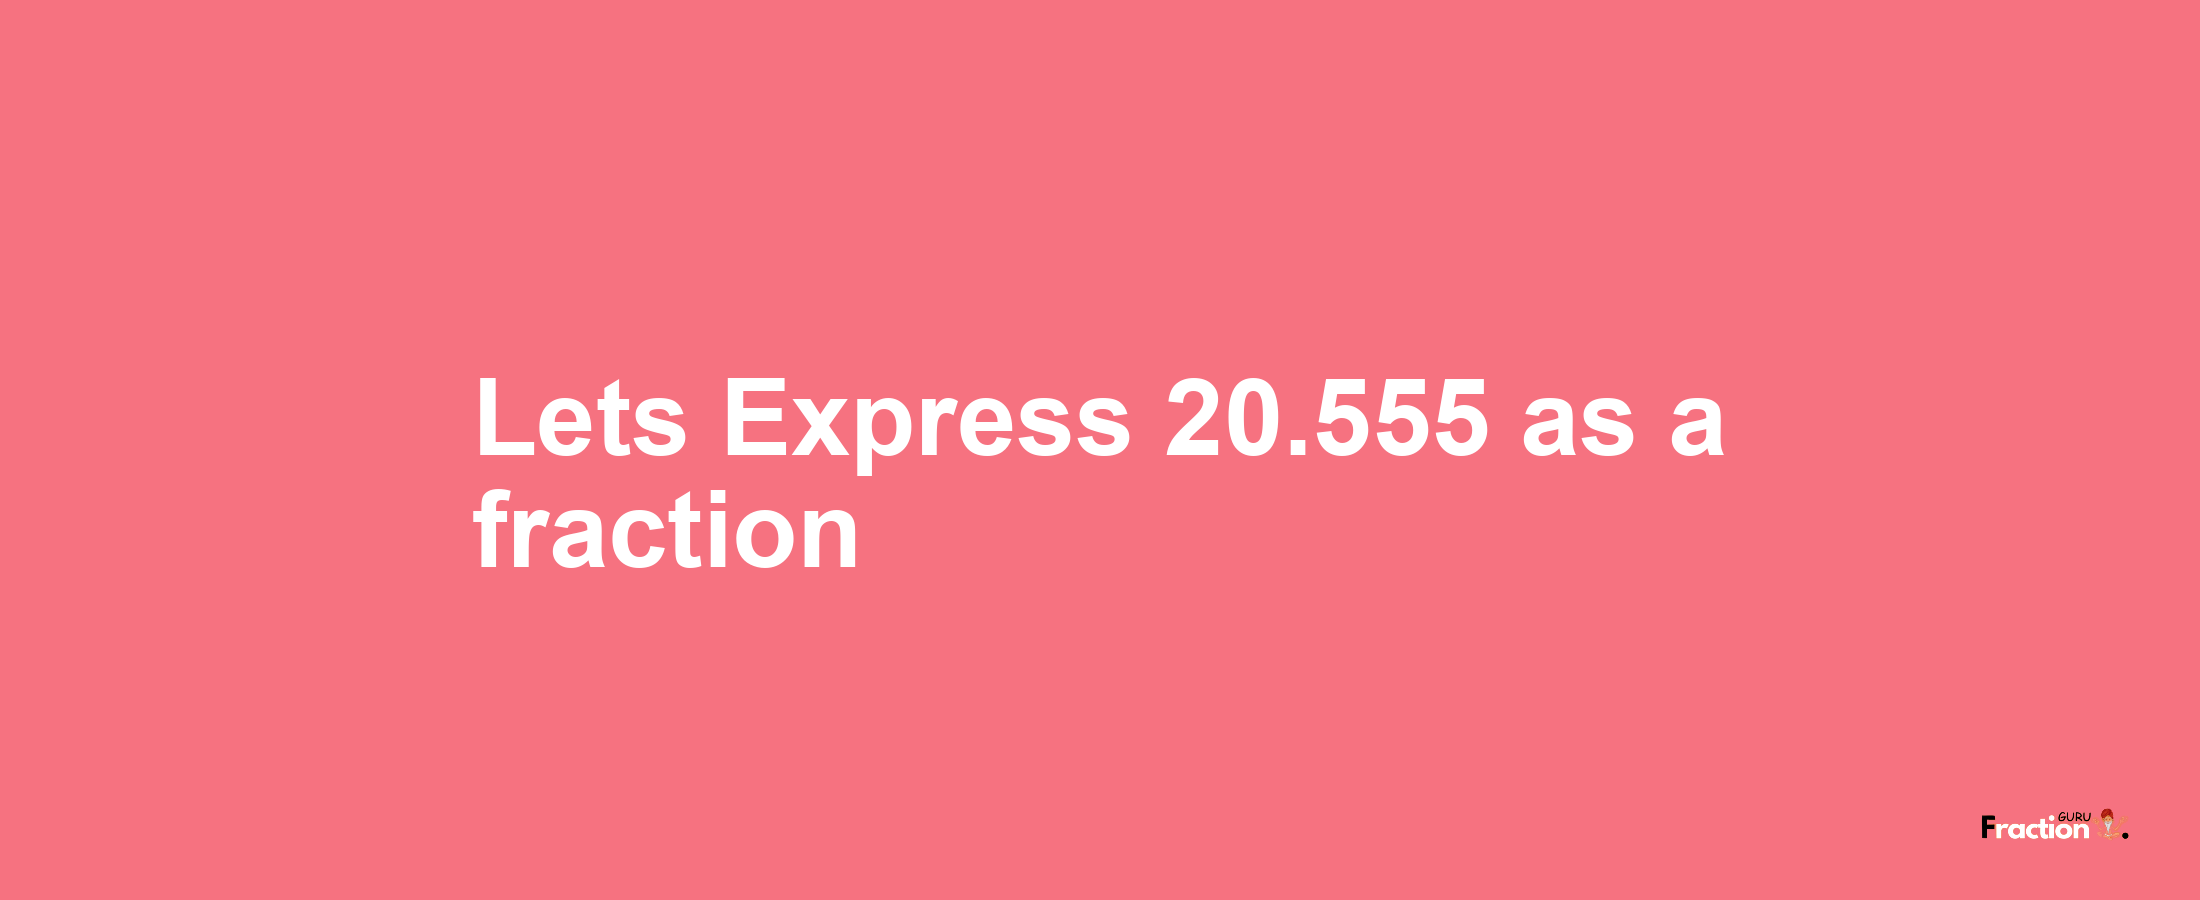 Lets Express 20.555 as afraction